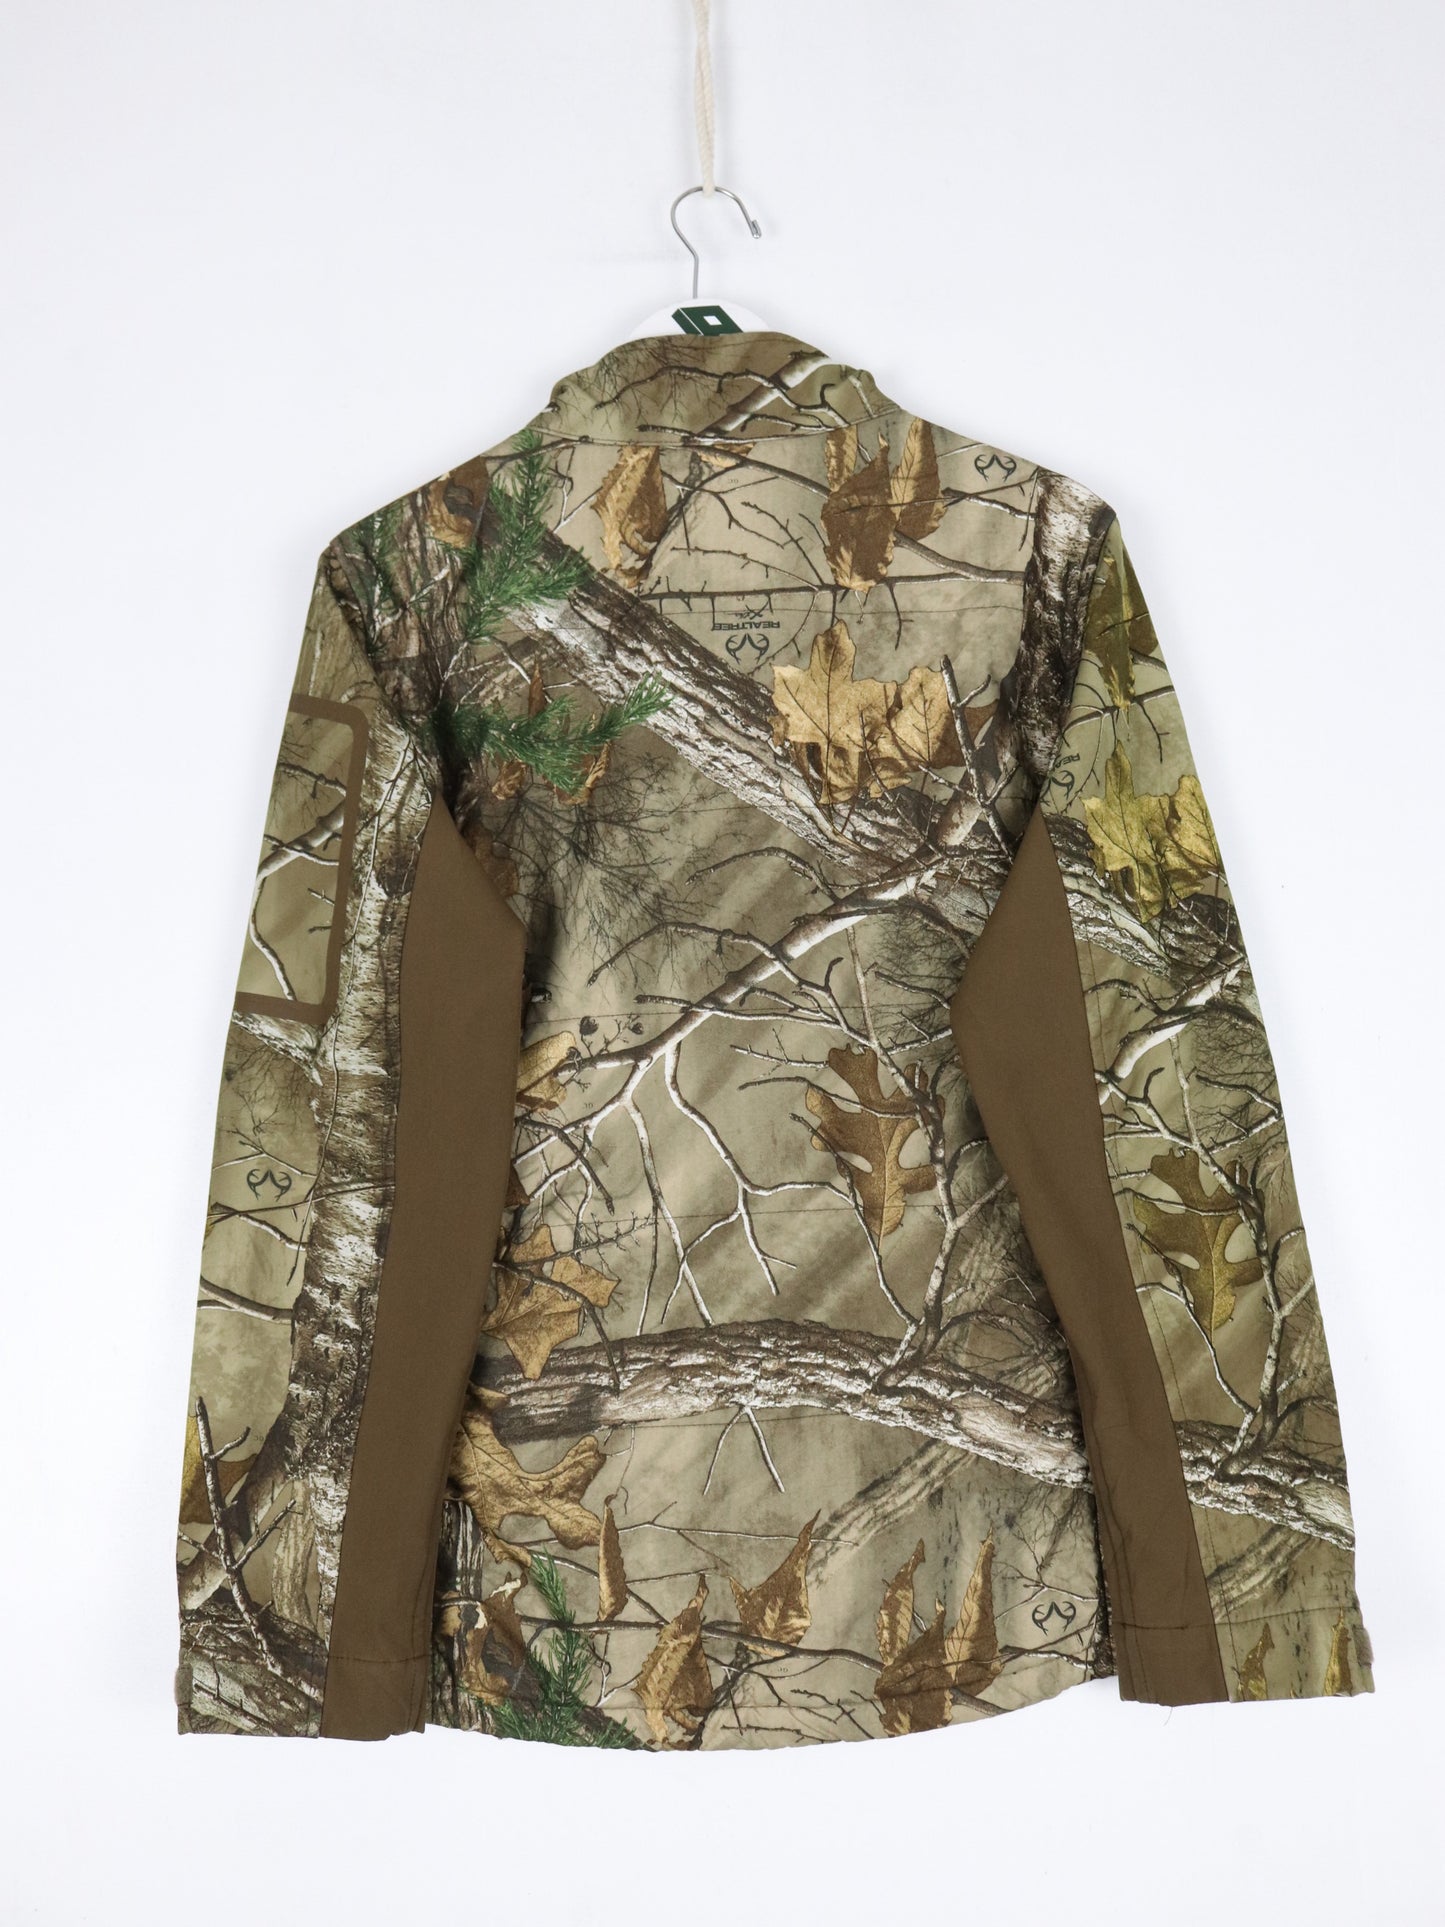 Real Tree Jacket Womens Large Brown Camo Hunting Outdoors Coat